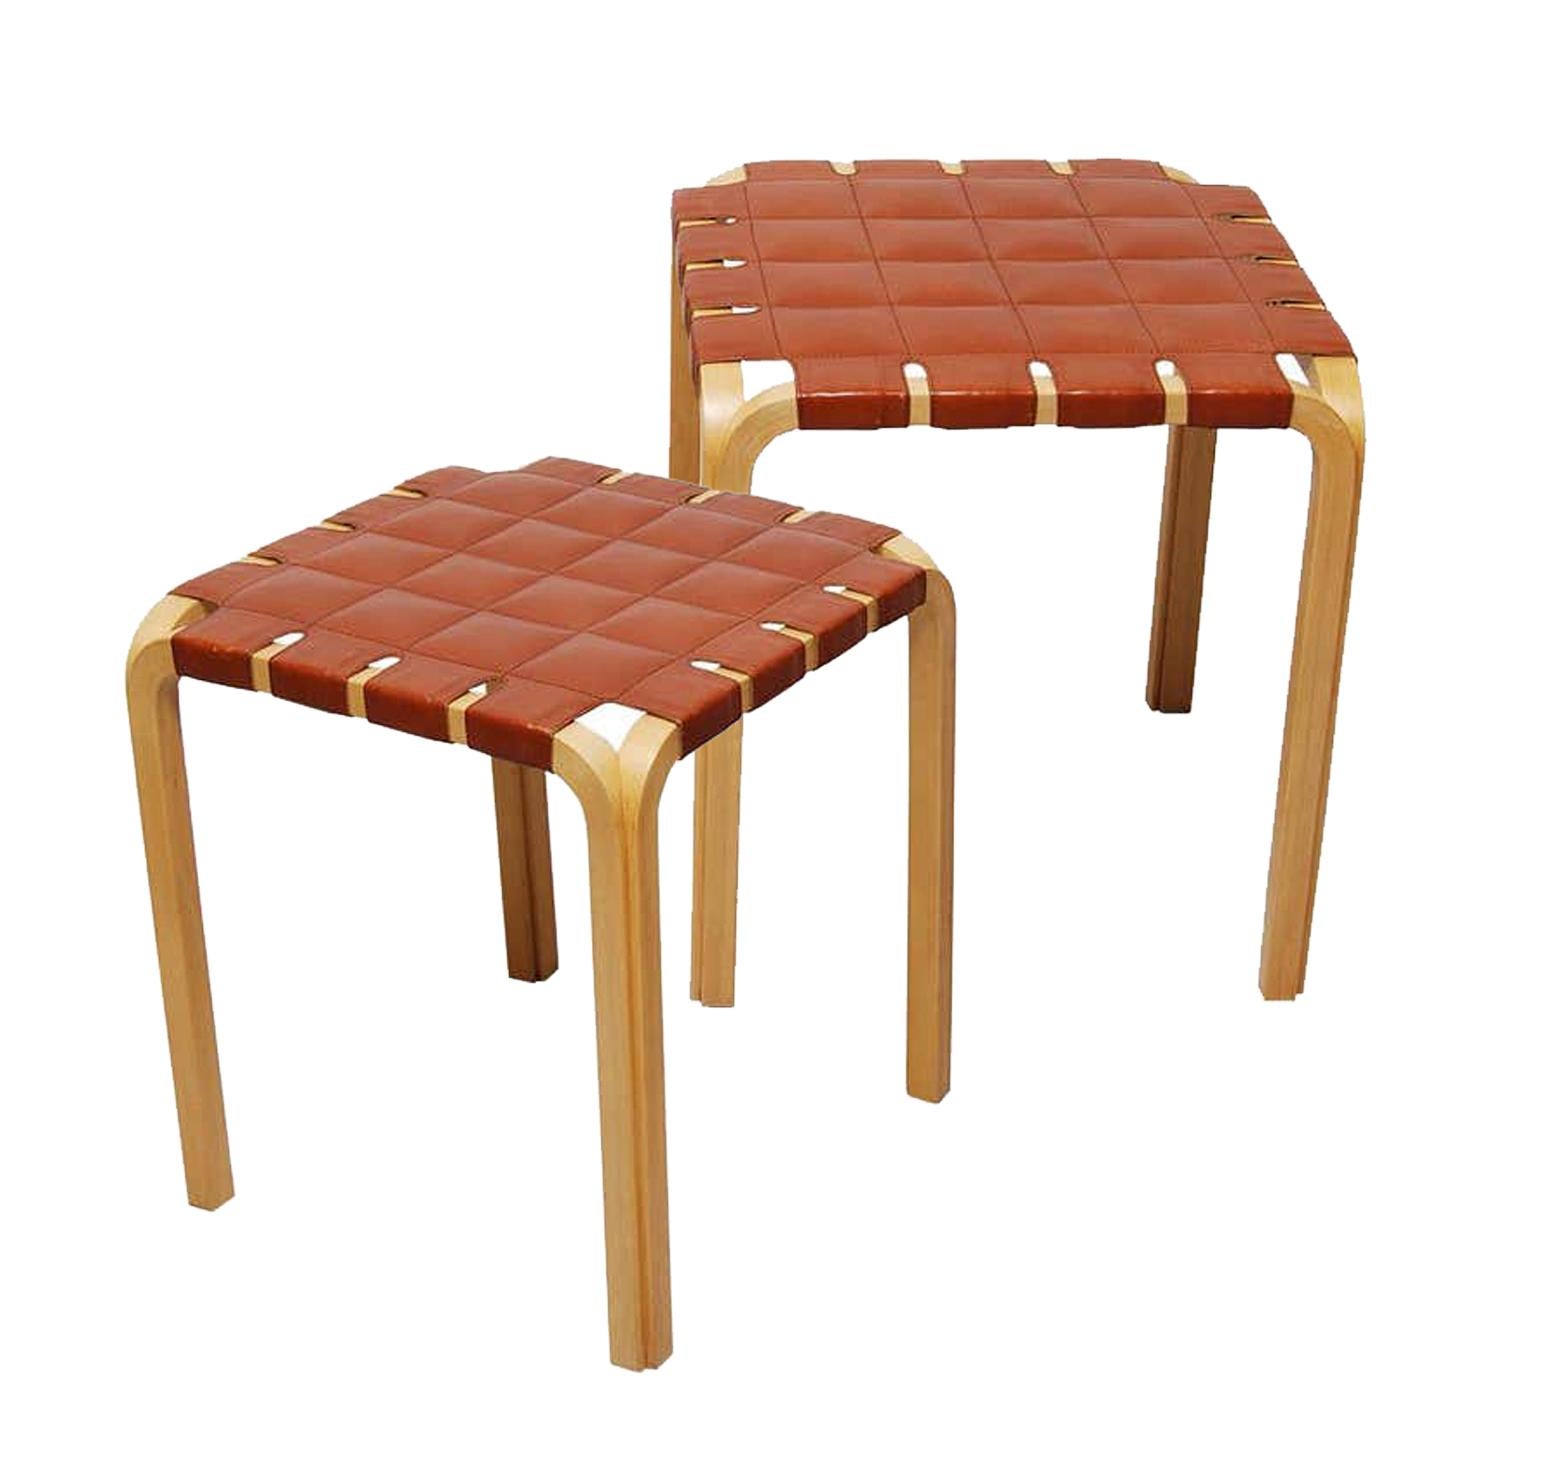 Finnish icons! A pair of Scandinavian Modern Alvar Aalto stool Y61 in birch with original leather seat. Designed in 1947, Alvar Aalto's Y61 stool required a special technique to create the unique birch Y-legs. Original leather seats in great